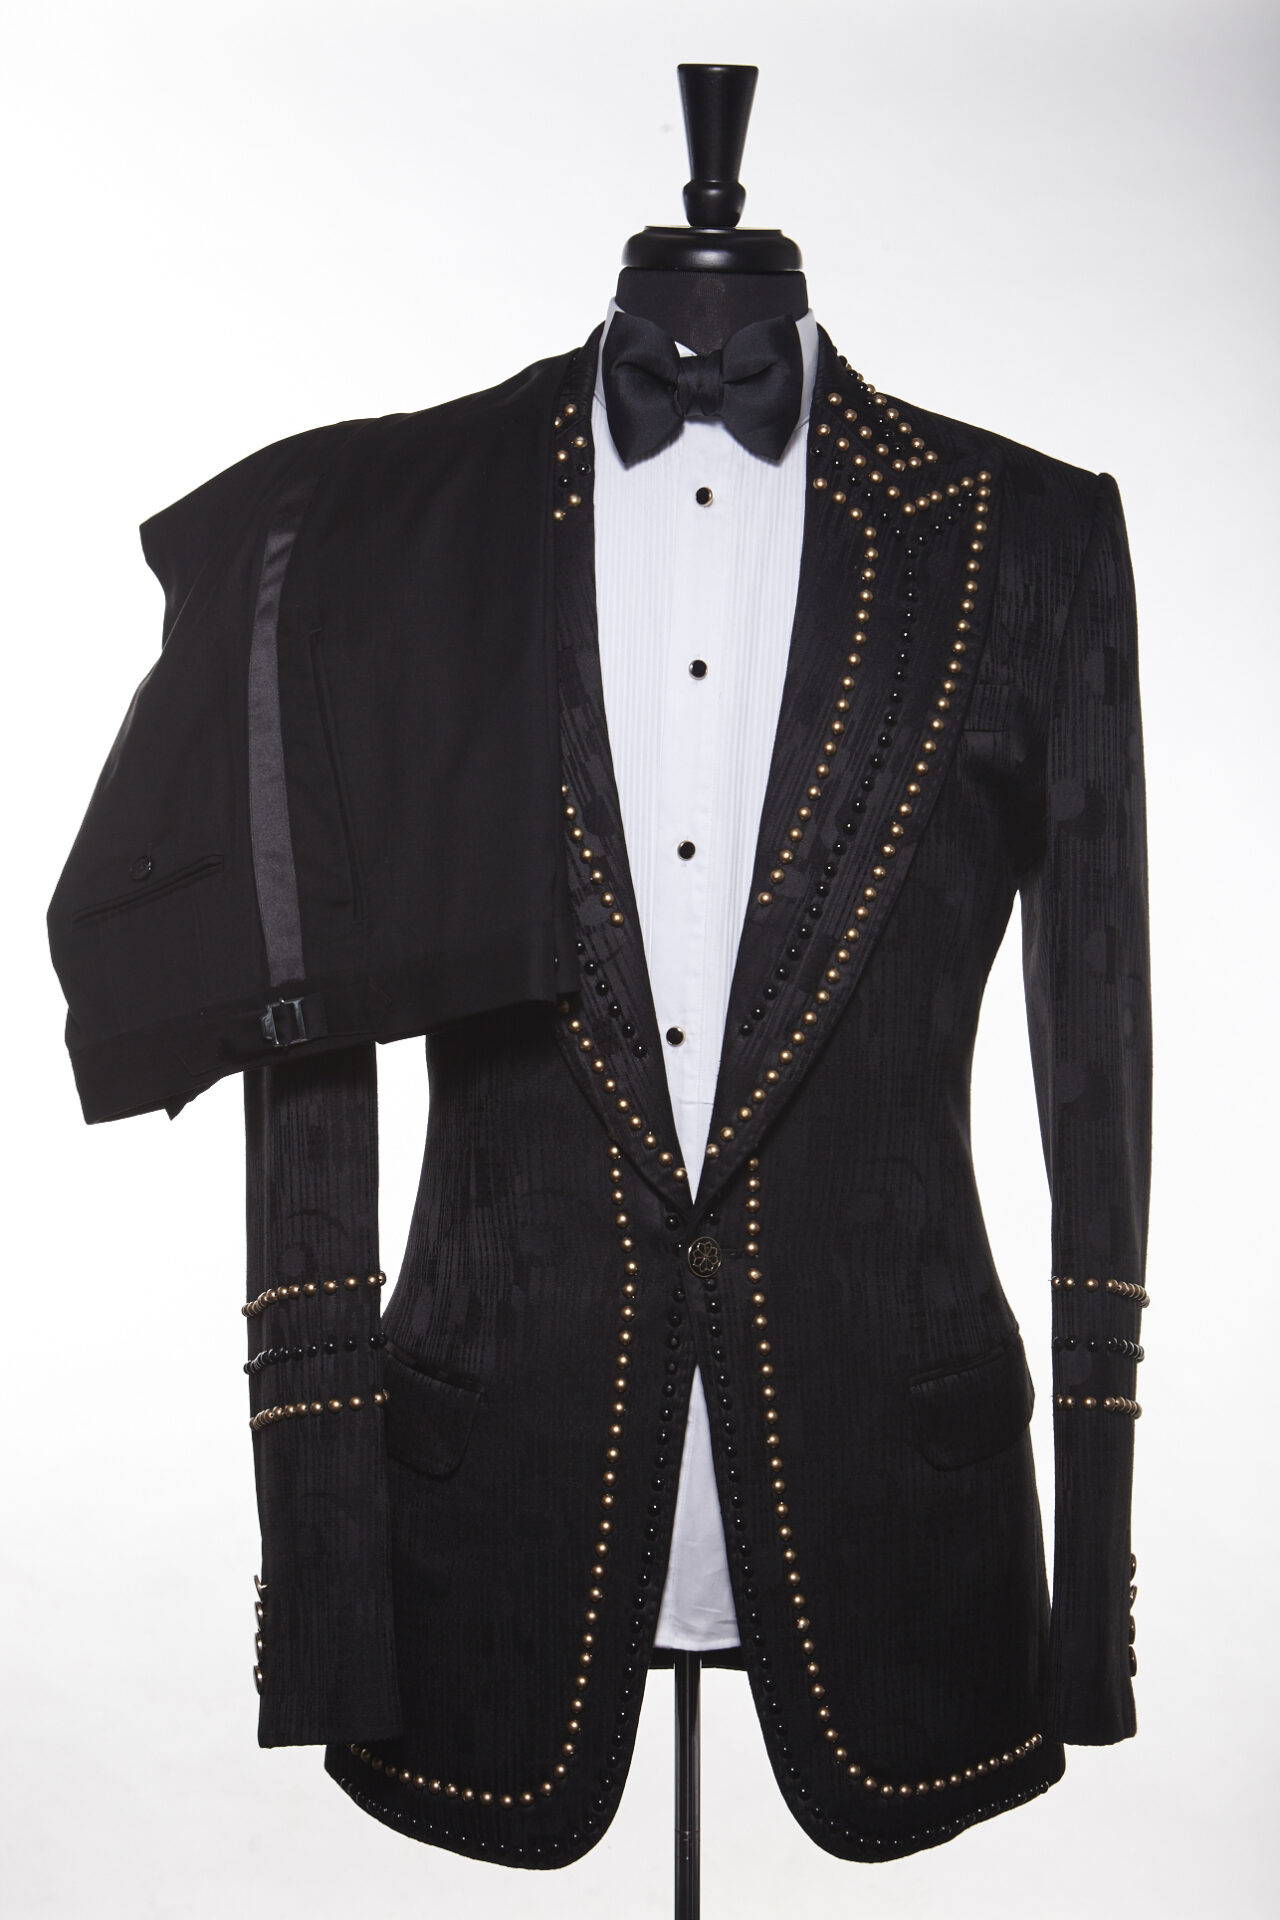 CLASSIC BLACK JACQUARD CONTEMPORARY SUIT WITH BLACK AND GOLD BIDS ...